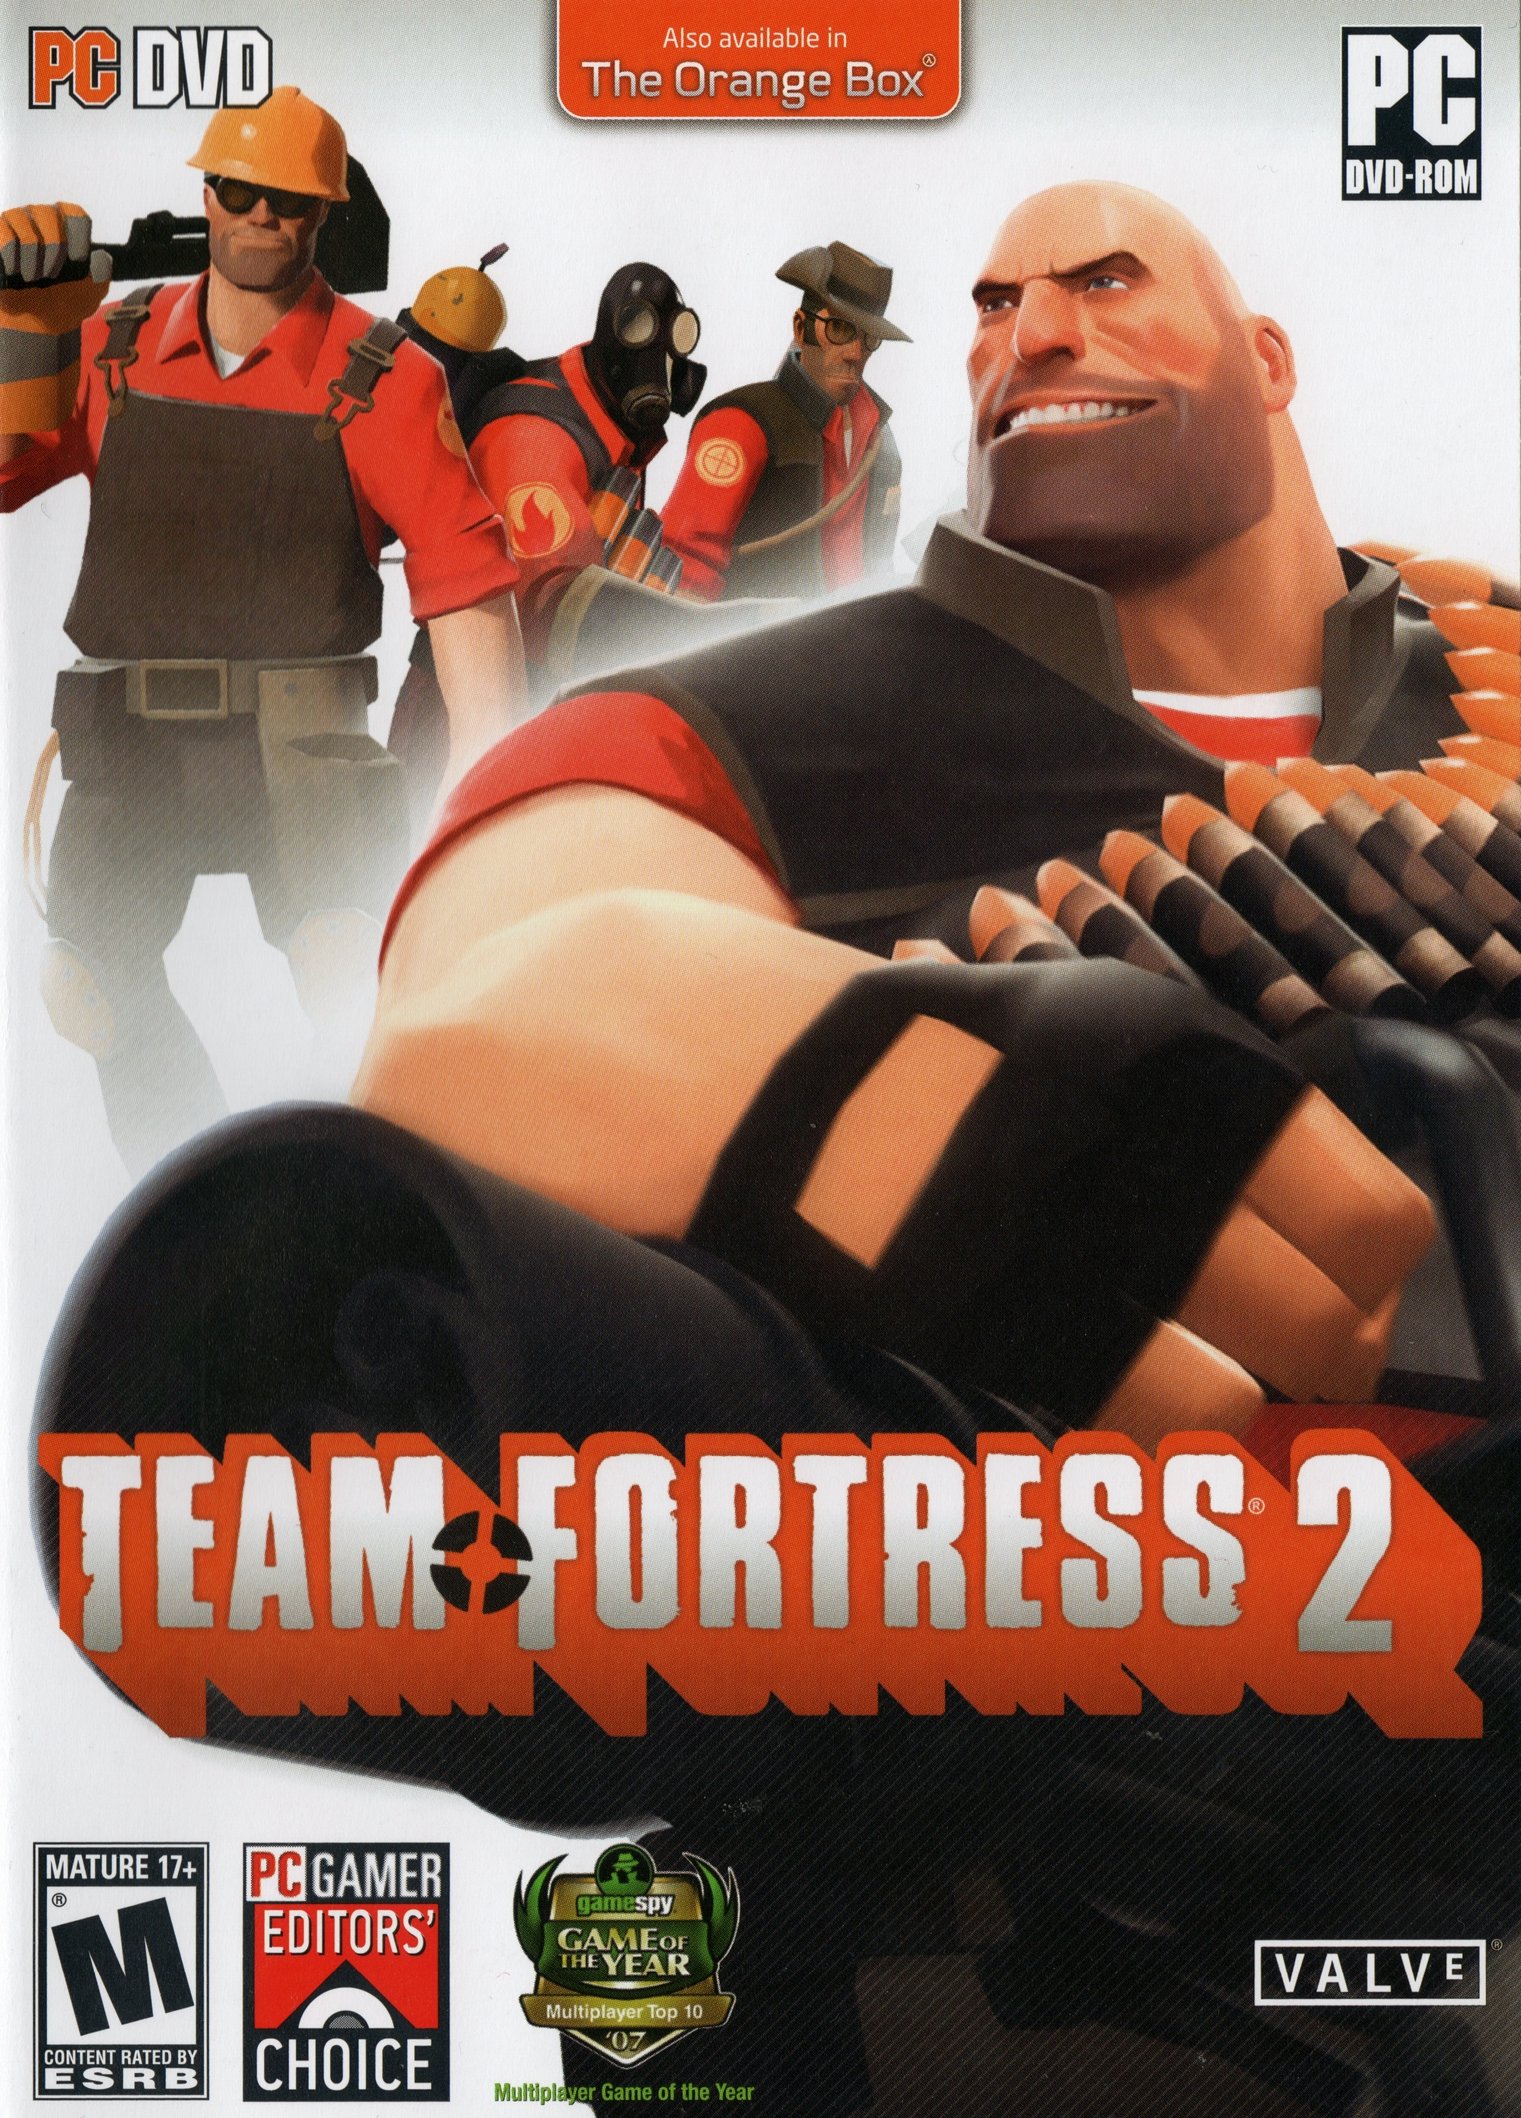 1440p team fortress 2 image